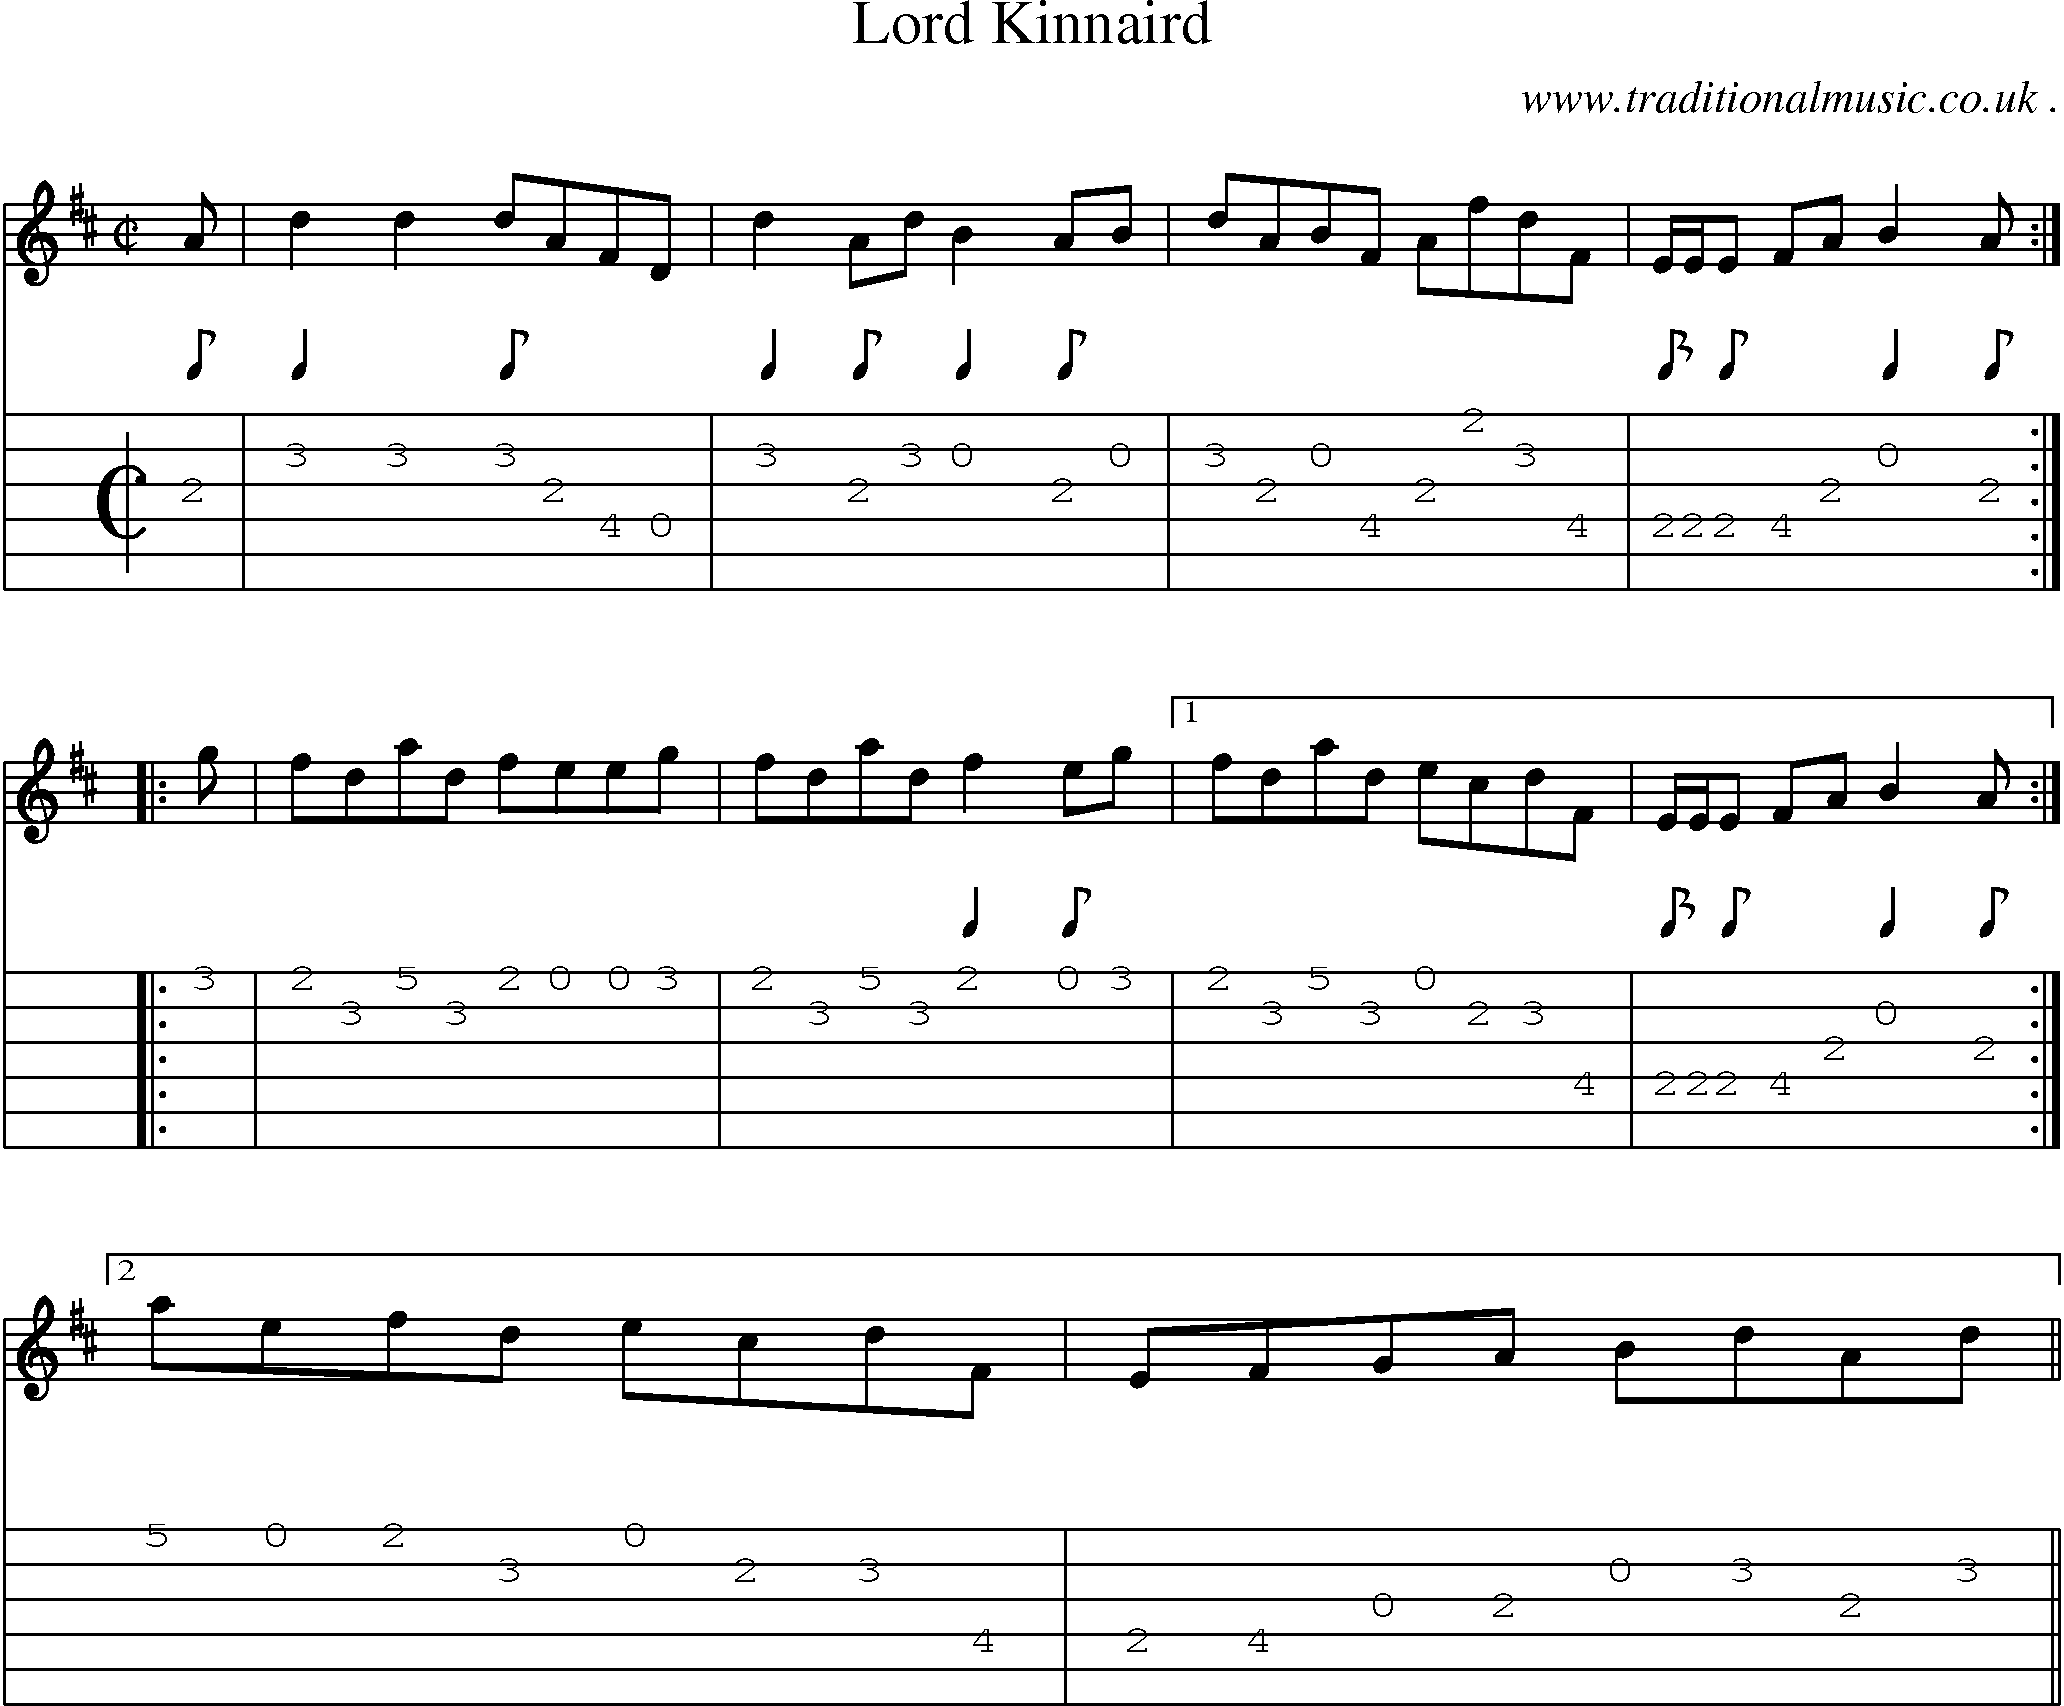 Sheet-music  score, Chords and Guitar Tabs for Lord Kinnaird